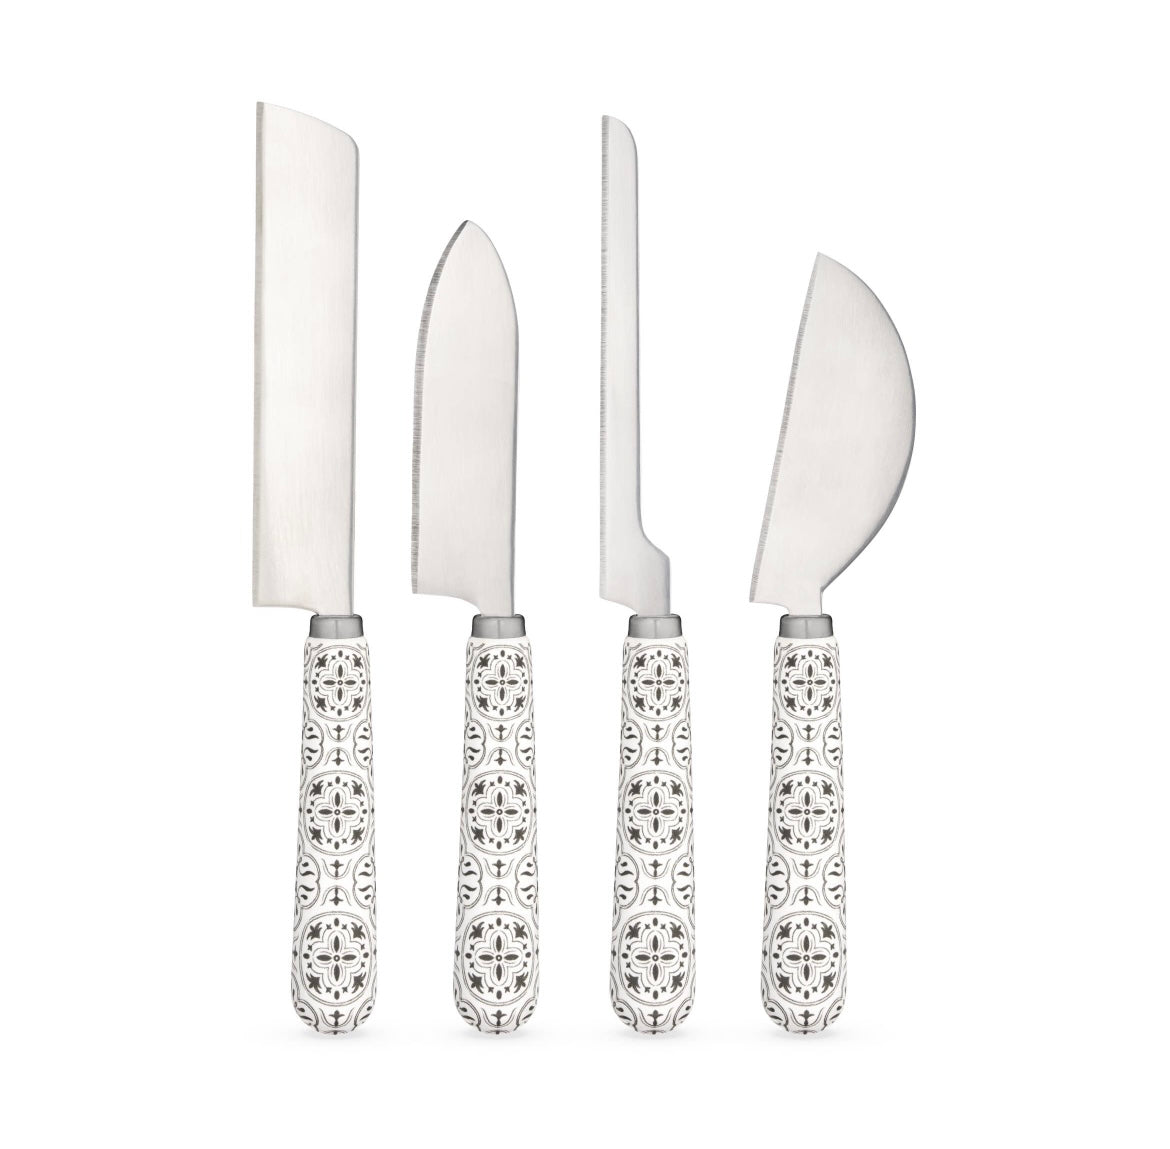 Gourmet cheese knife set, rustic farmhouse – Jade Willow Boutique Shop